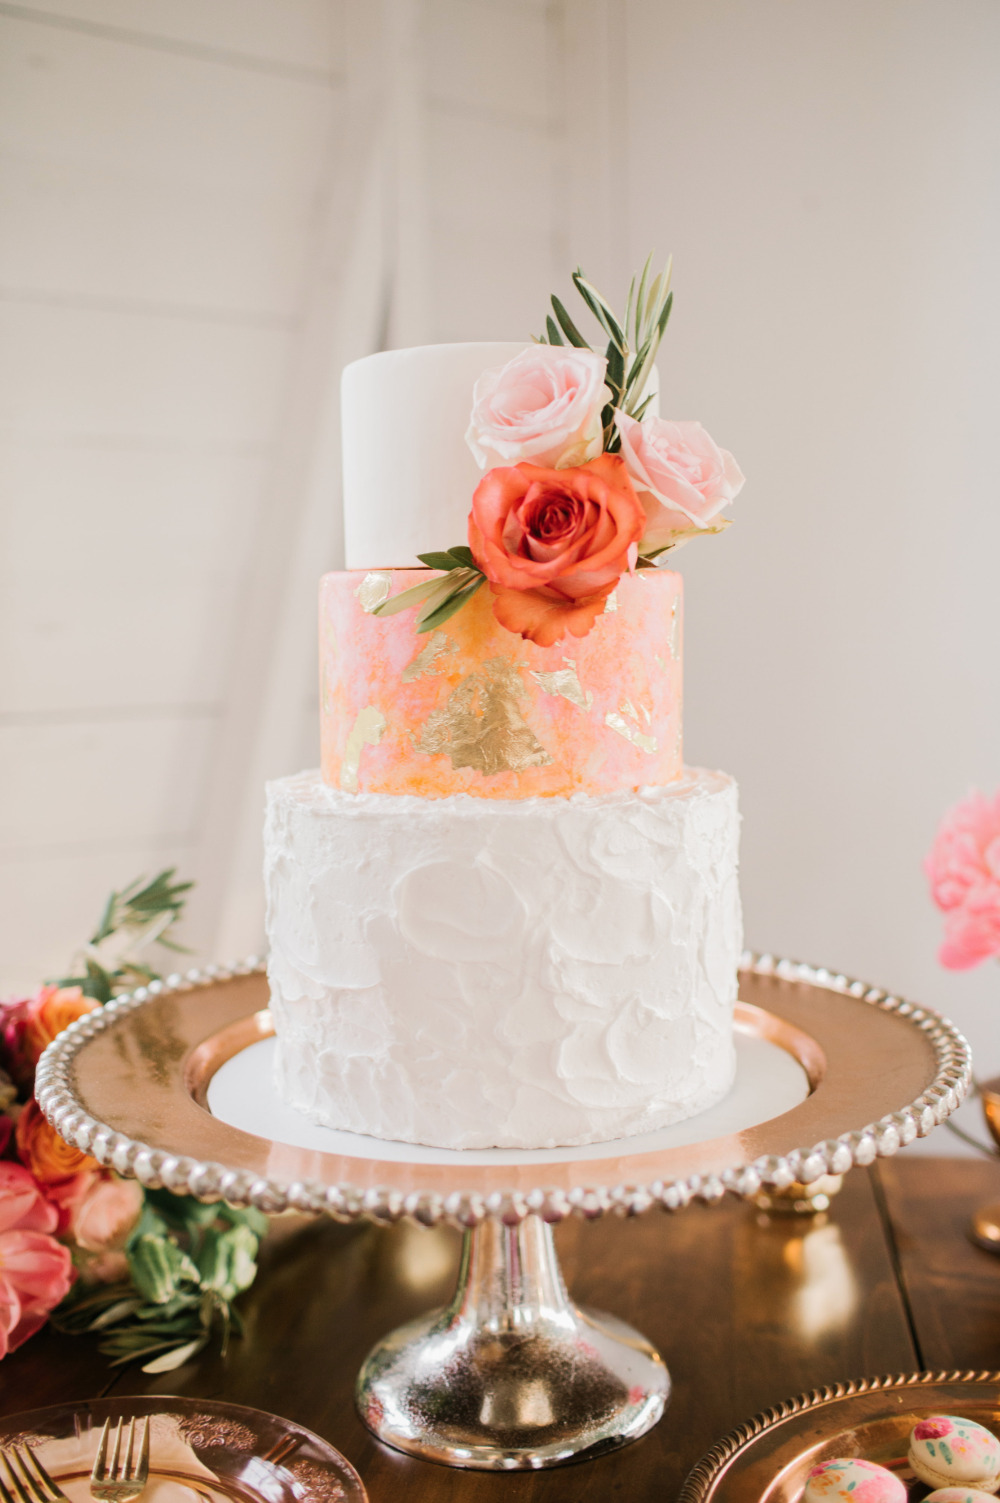 3 teir wedding cake with different textures